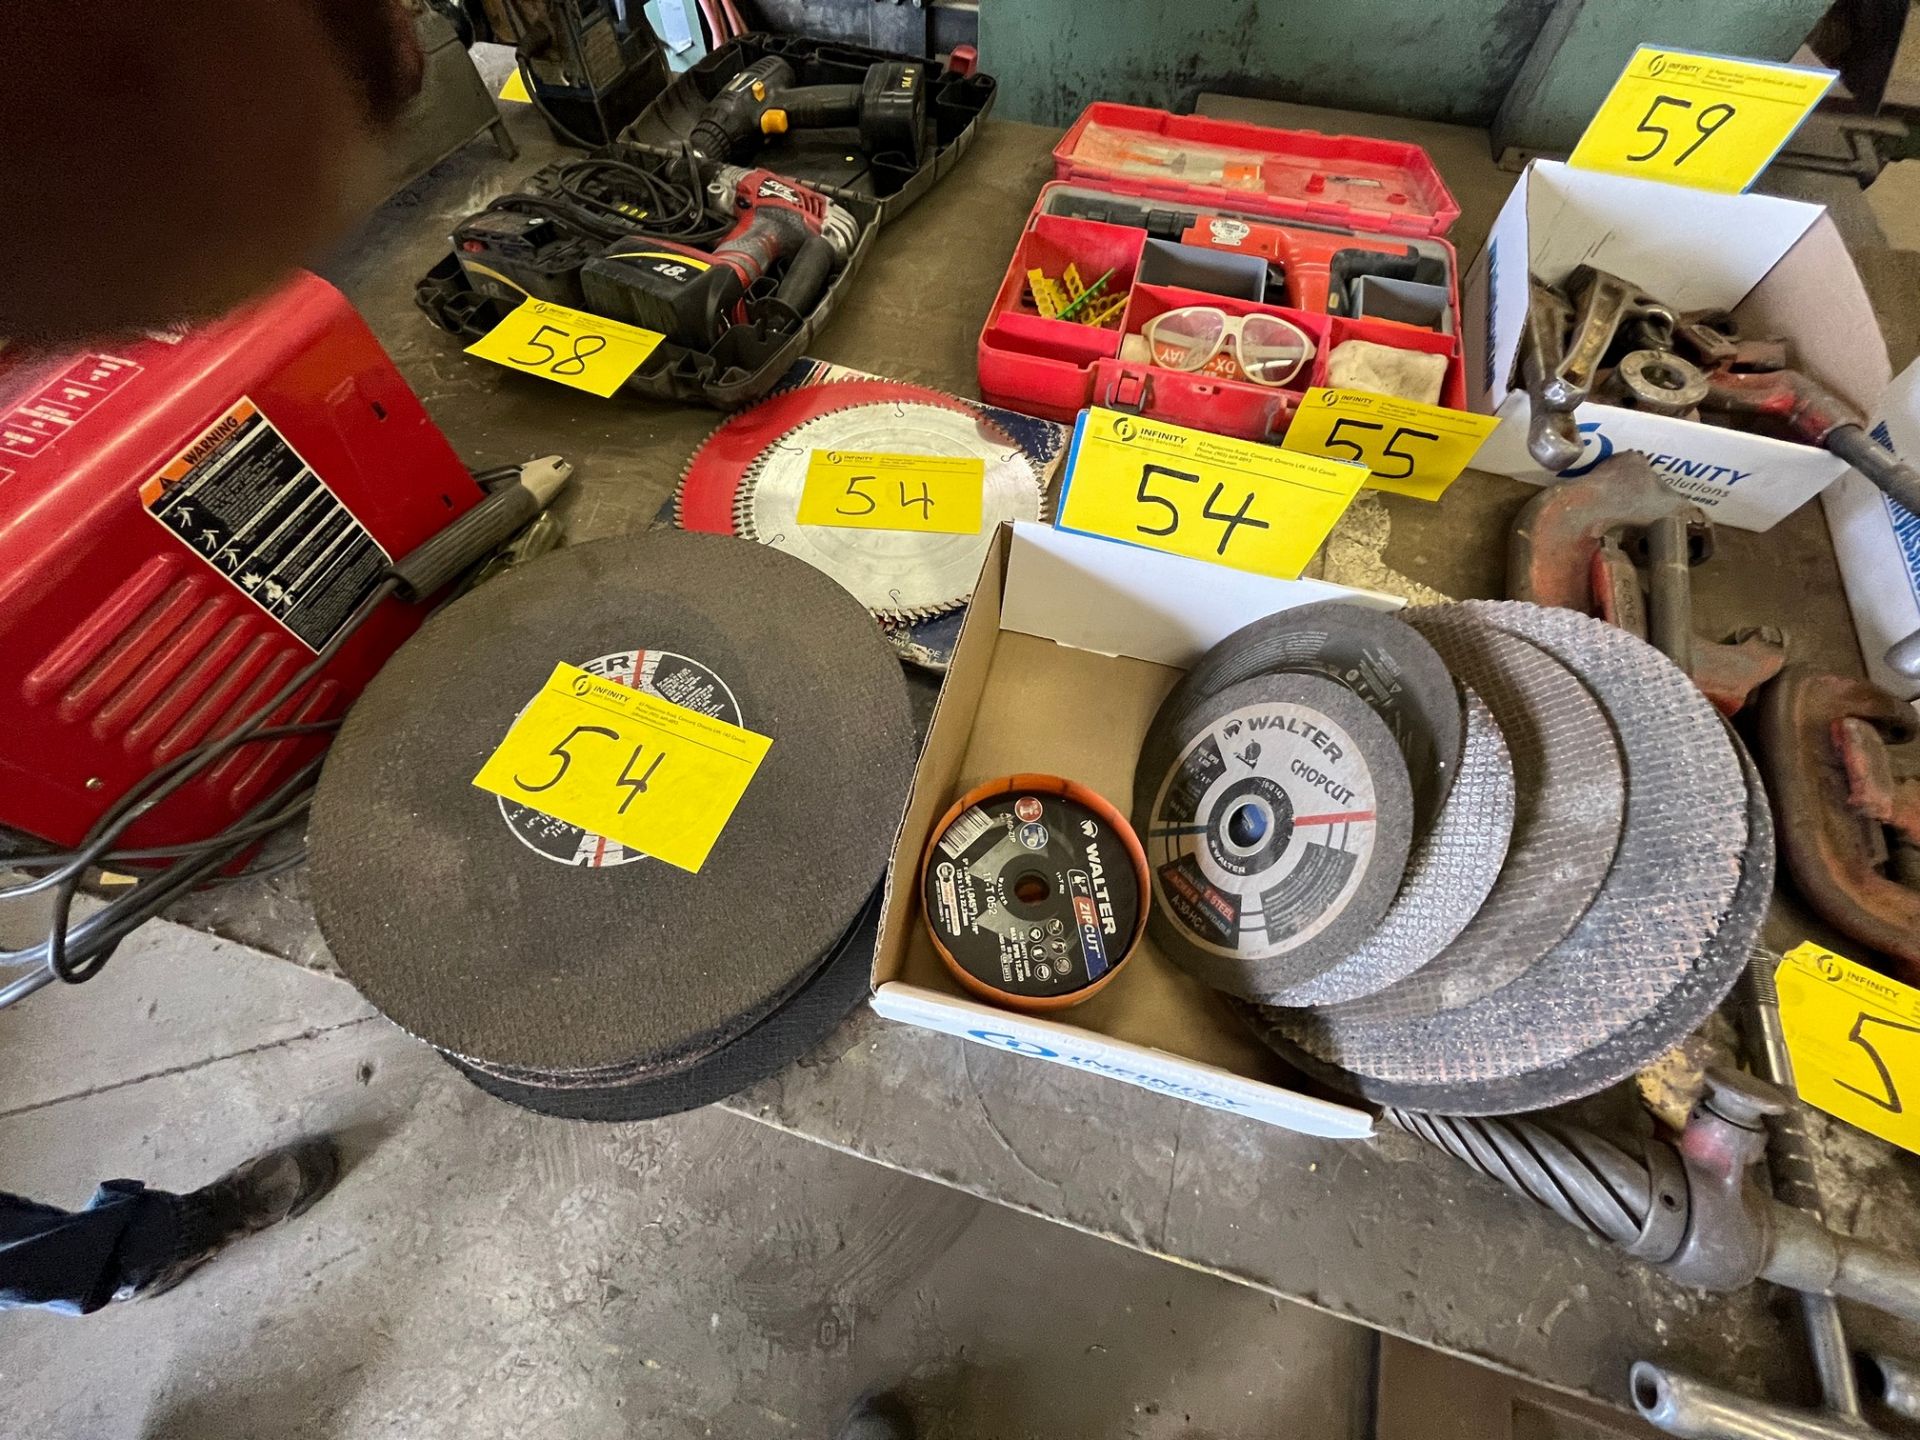 LOT OF CUTTING WHEELS AND BLADES